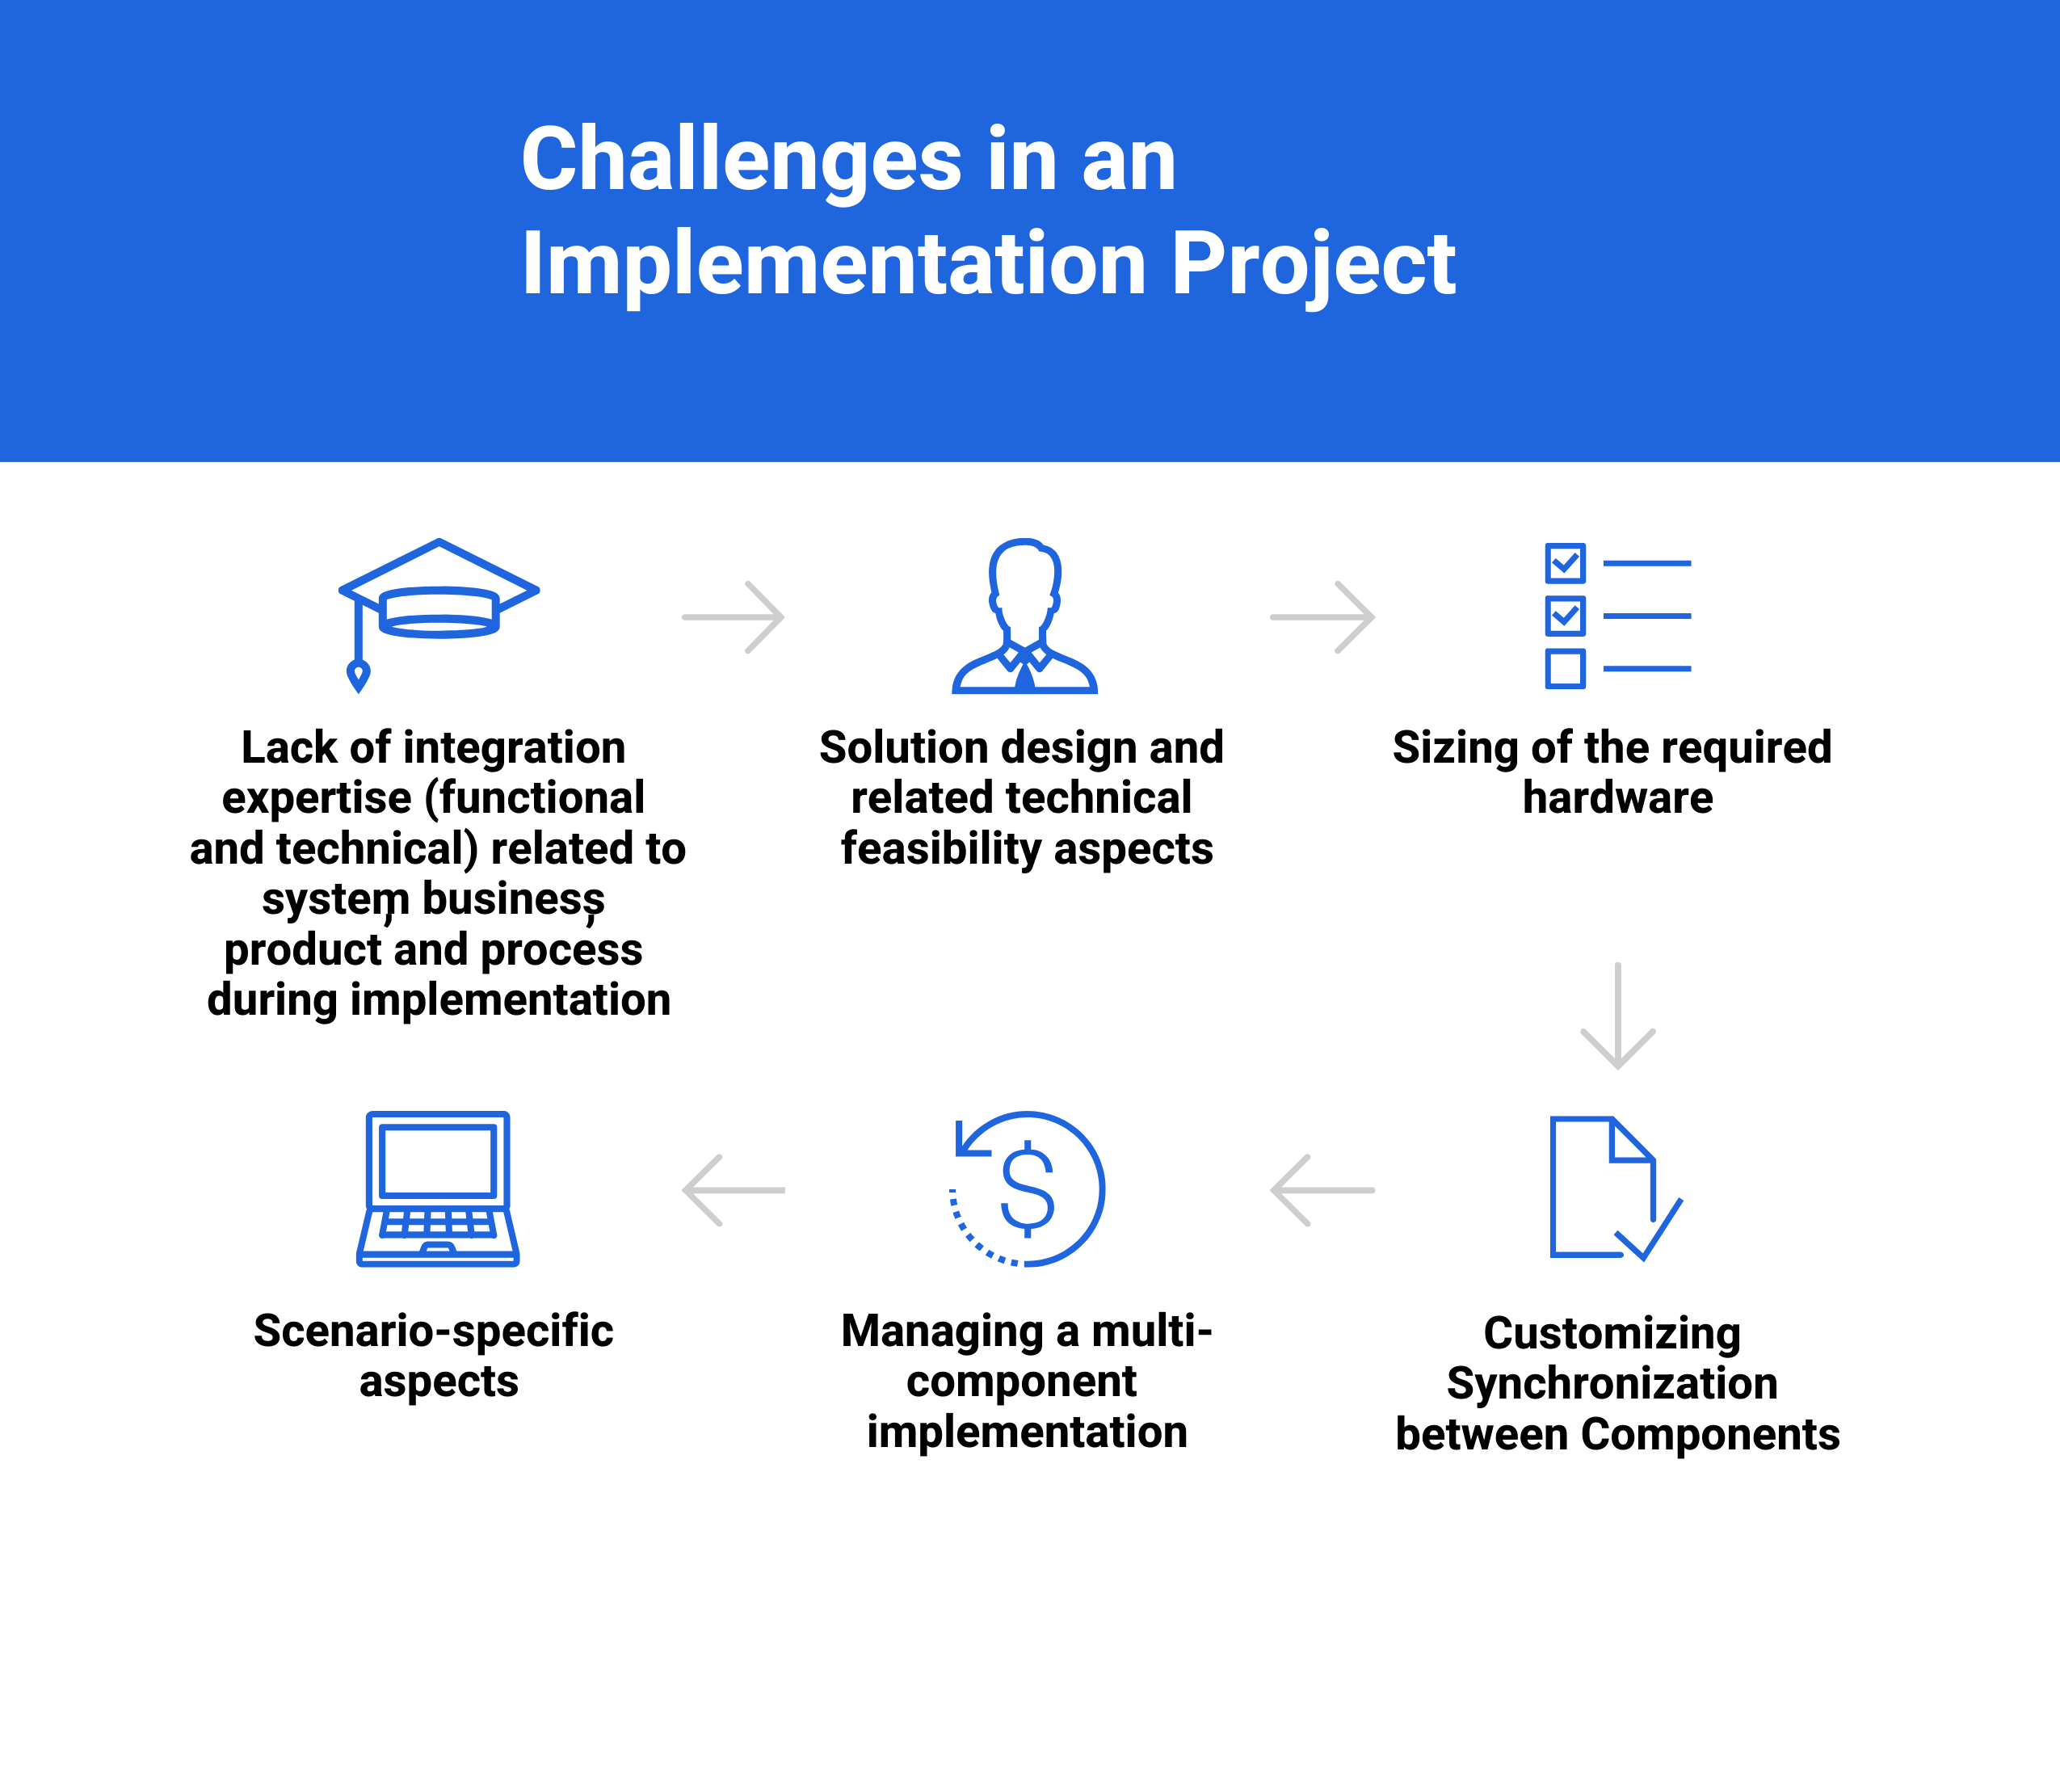 What are the Challenges in an Implementation Project